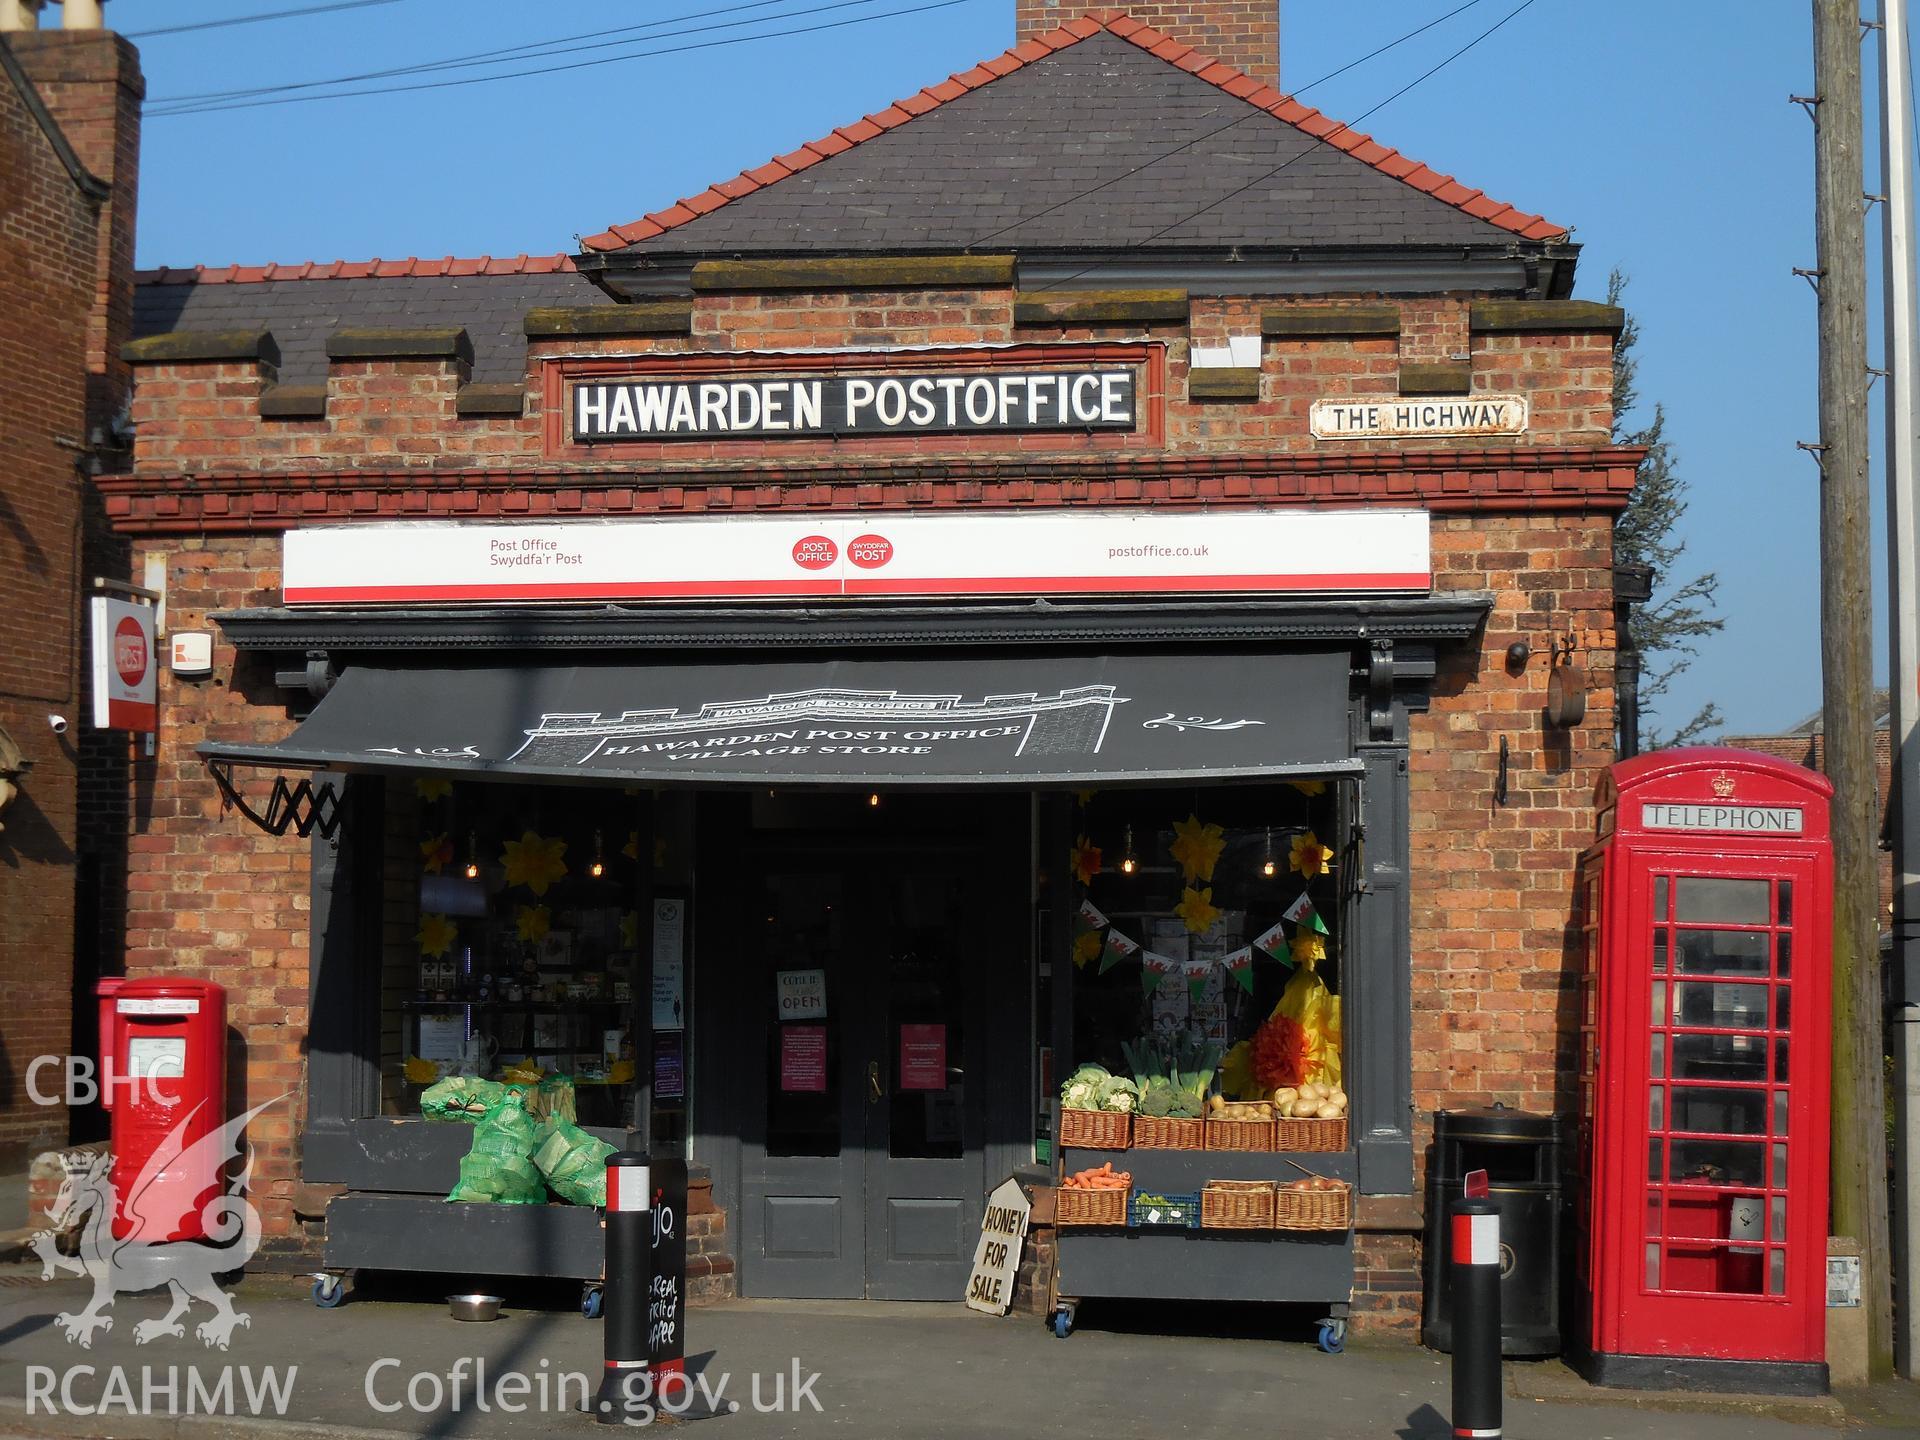 Colour digital photograph showing telephone box and Post Office, The Highway, Hawarden, taken in March 2022.